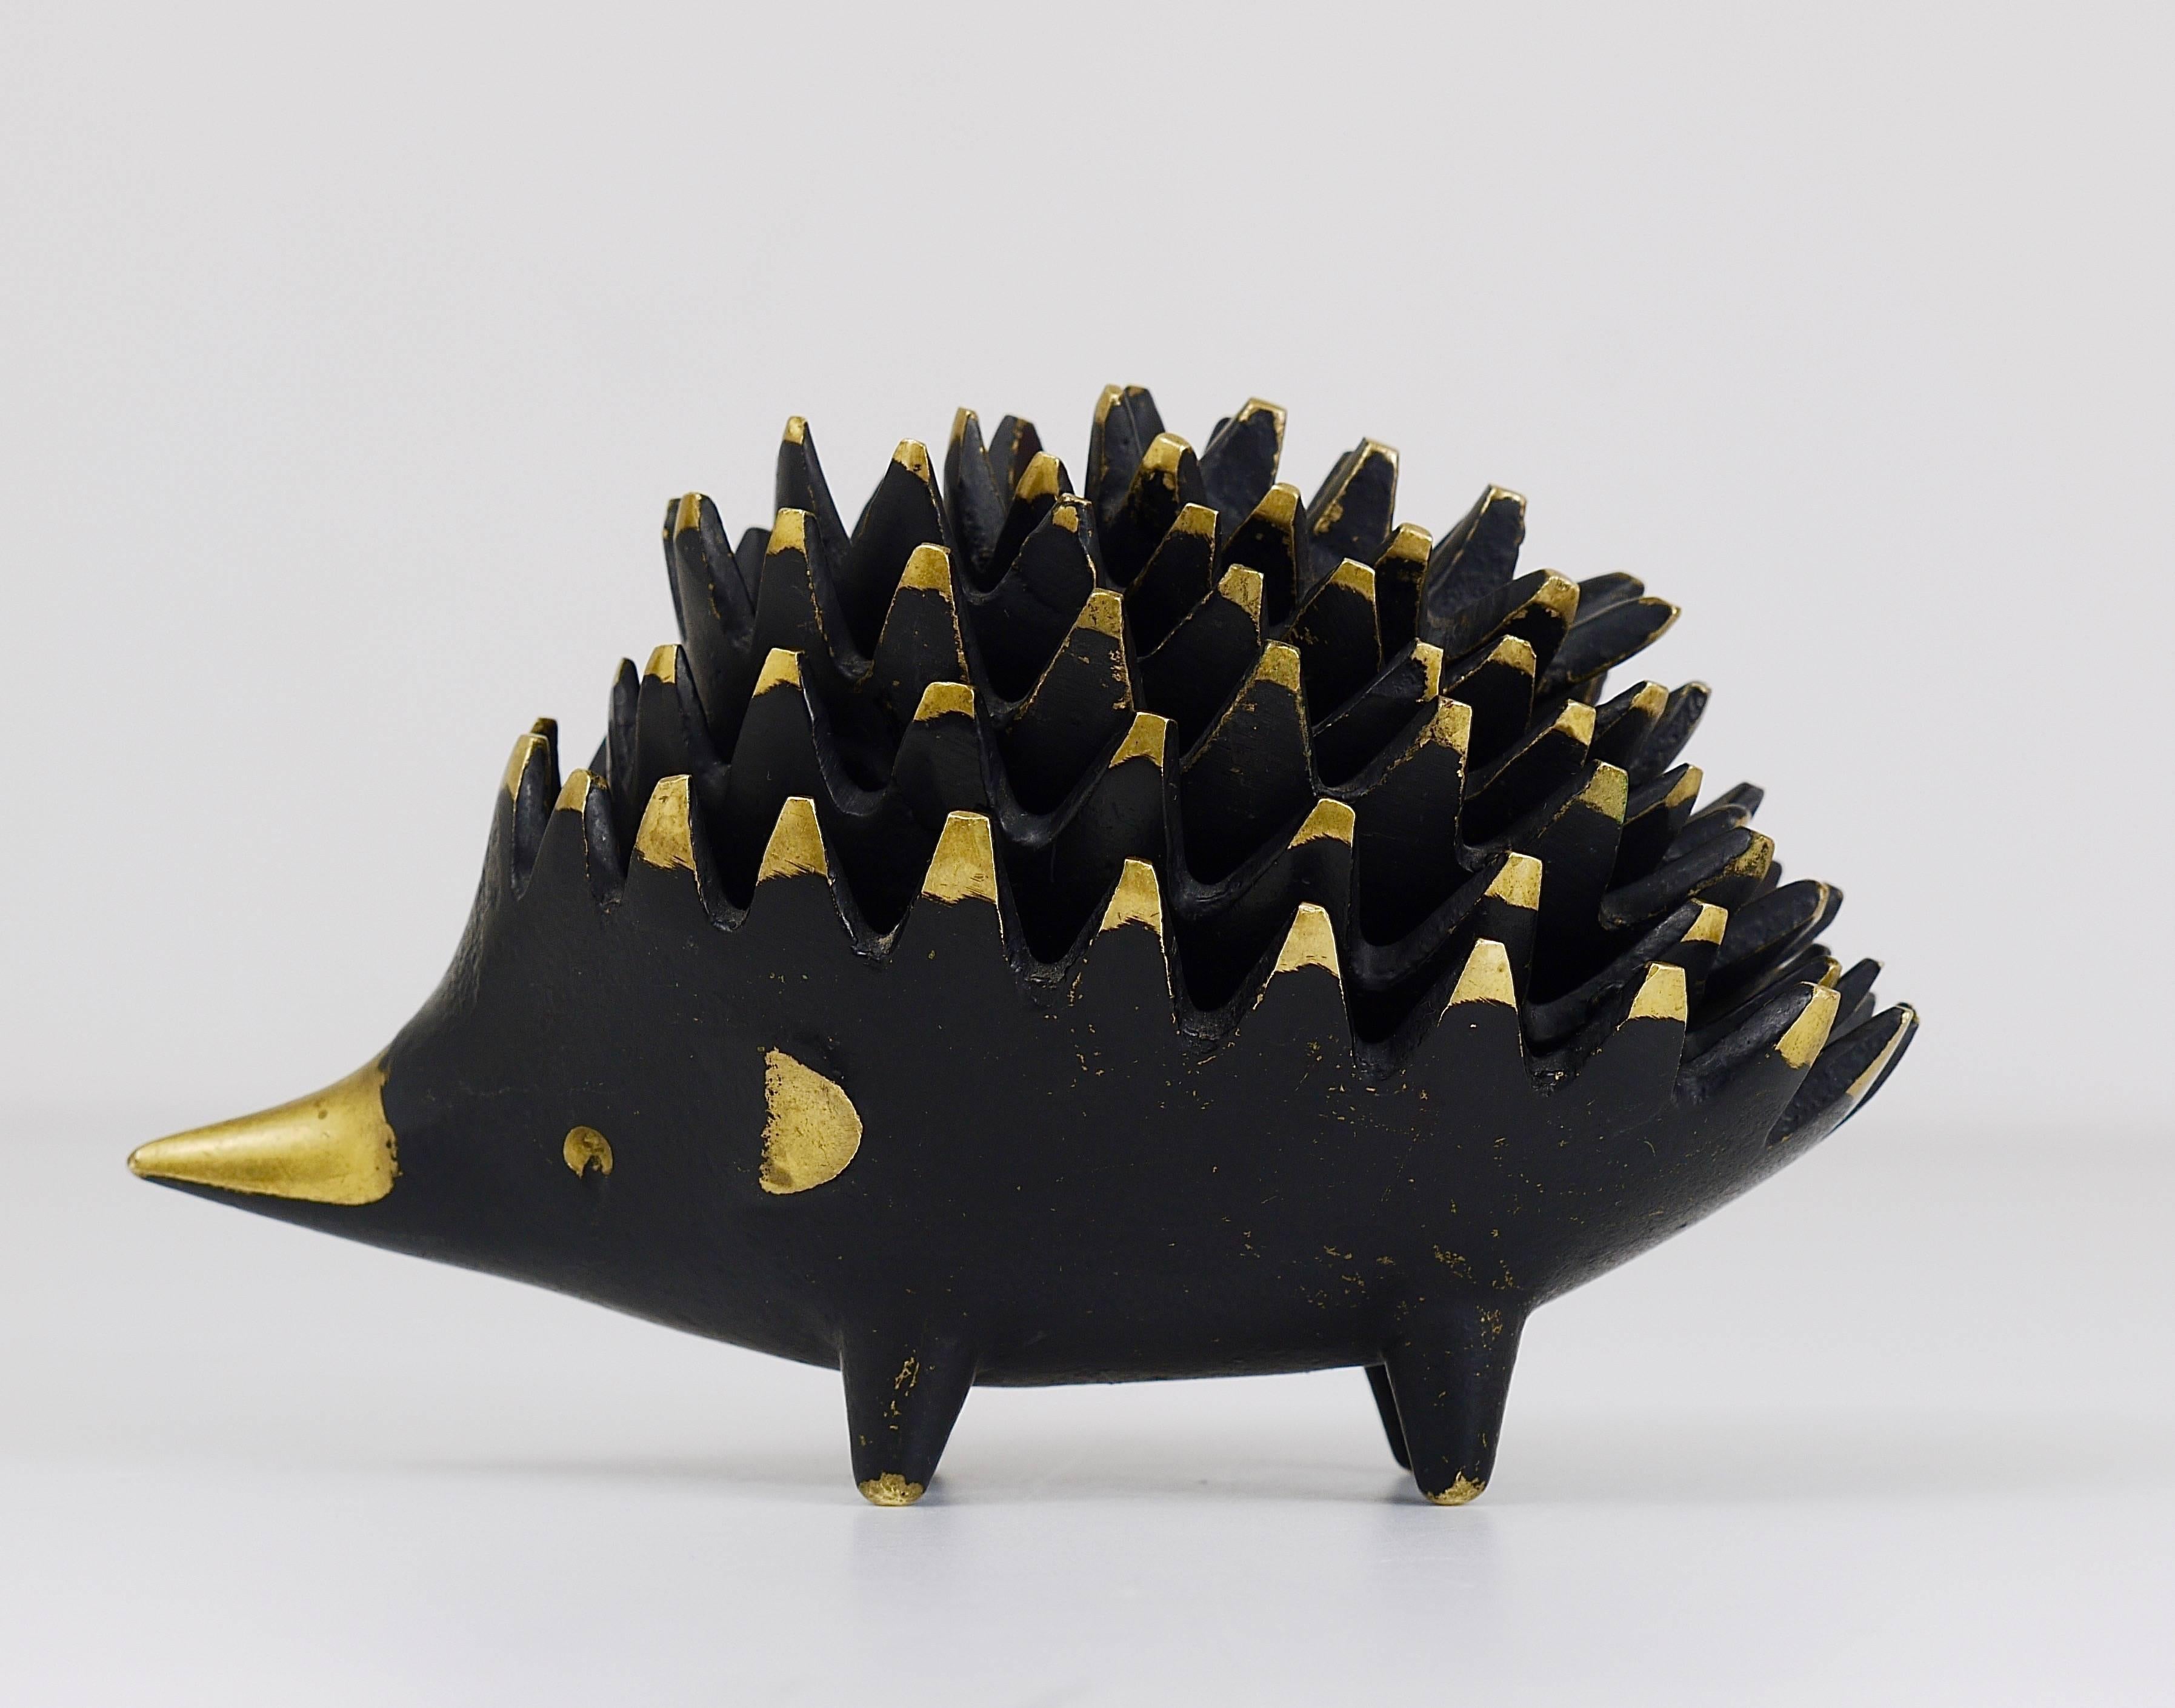 A complete set of six stackable hedgehog ashtrays. A very humorous design by Walter Bosse, executed by Hertha Baller Austria in the 1950s. Made of brass, in good condition with nice patina.